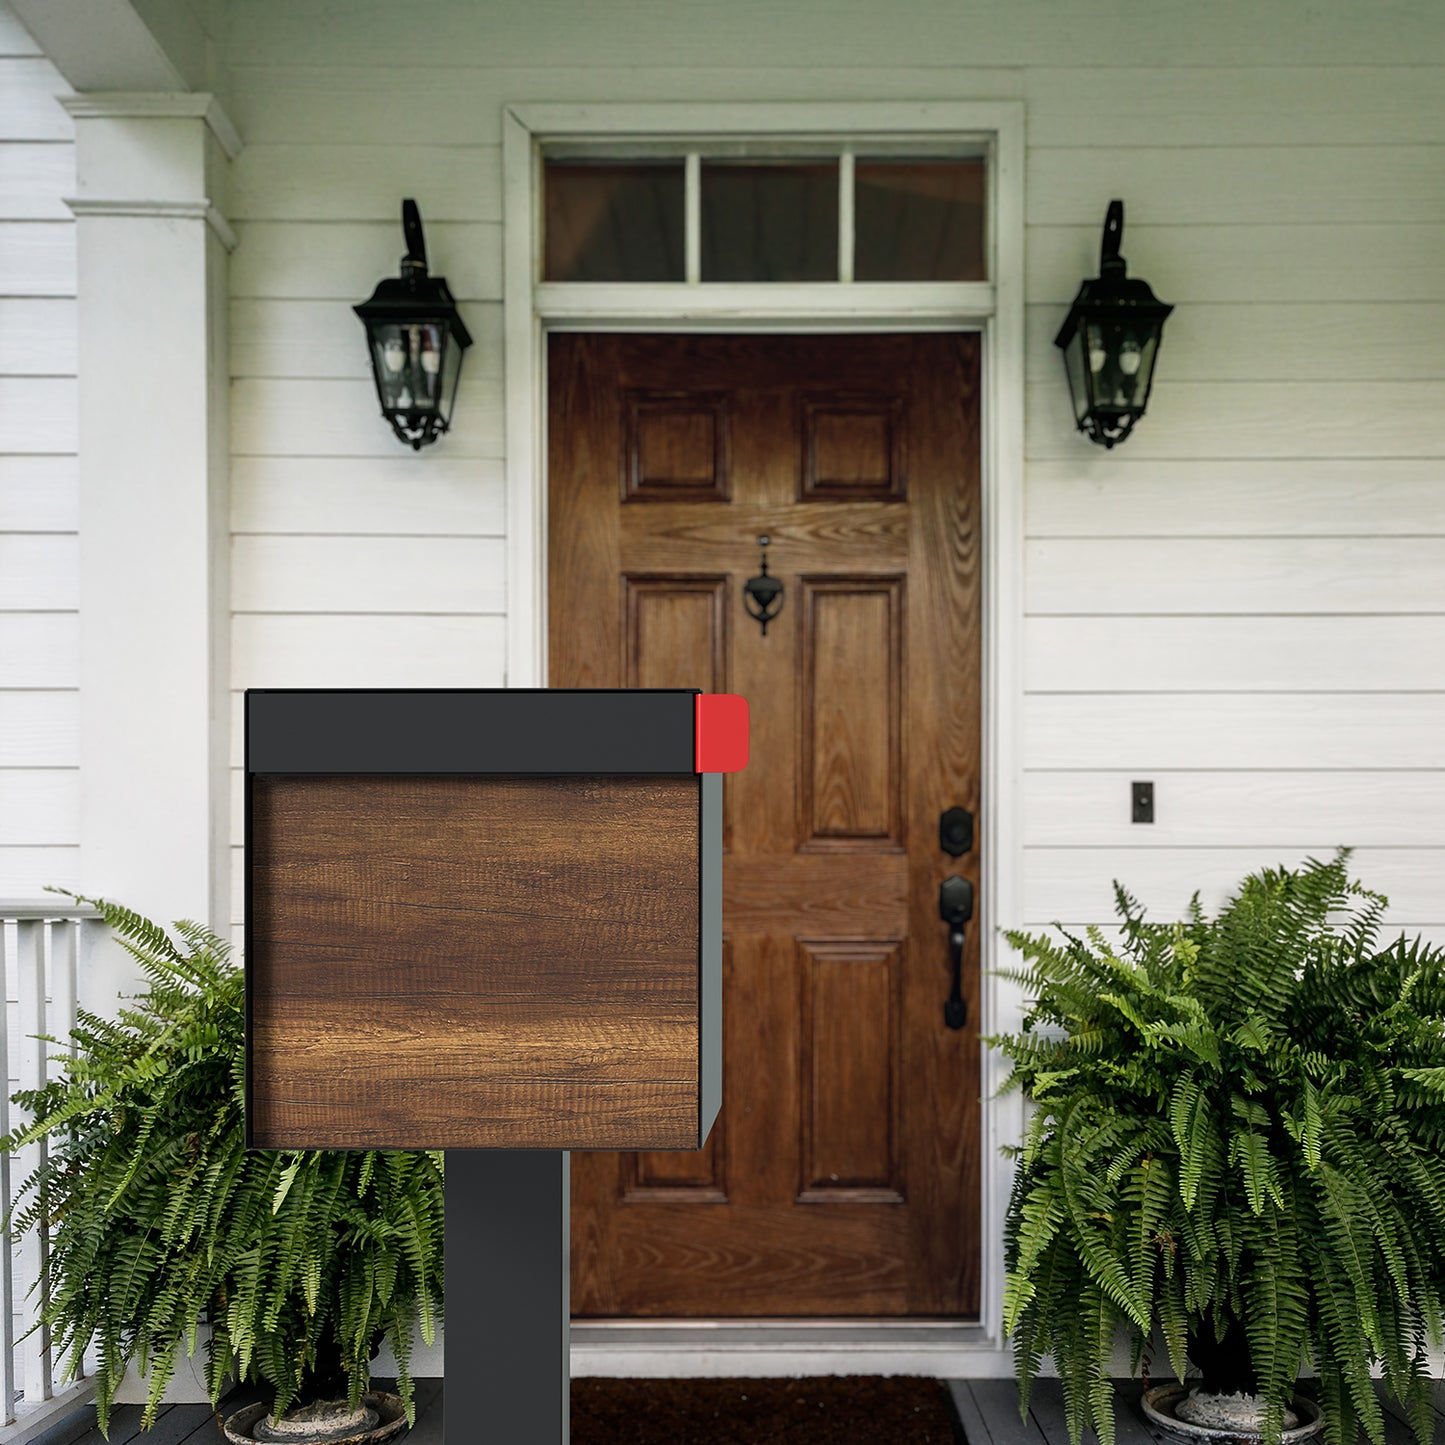 Town Square Mailbox by Bravios - Large Capacity Mailbox (Without Post) - Black with Barrique Oak Wood Panel